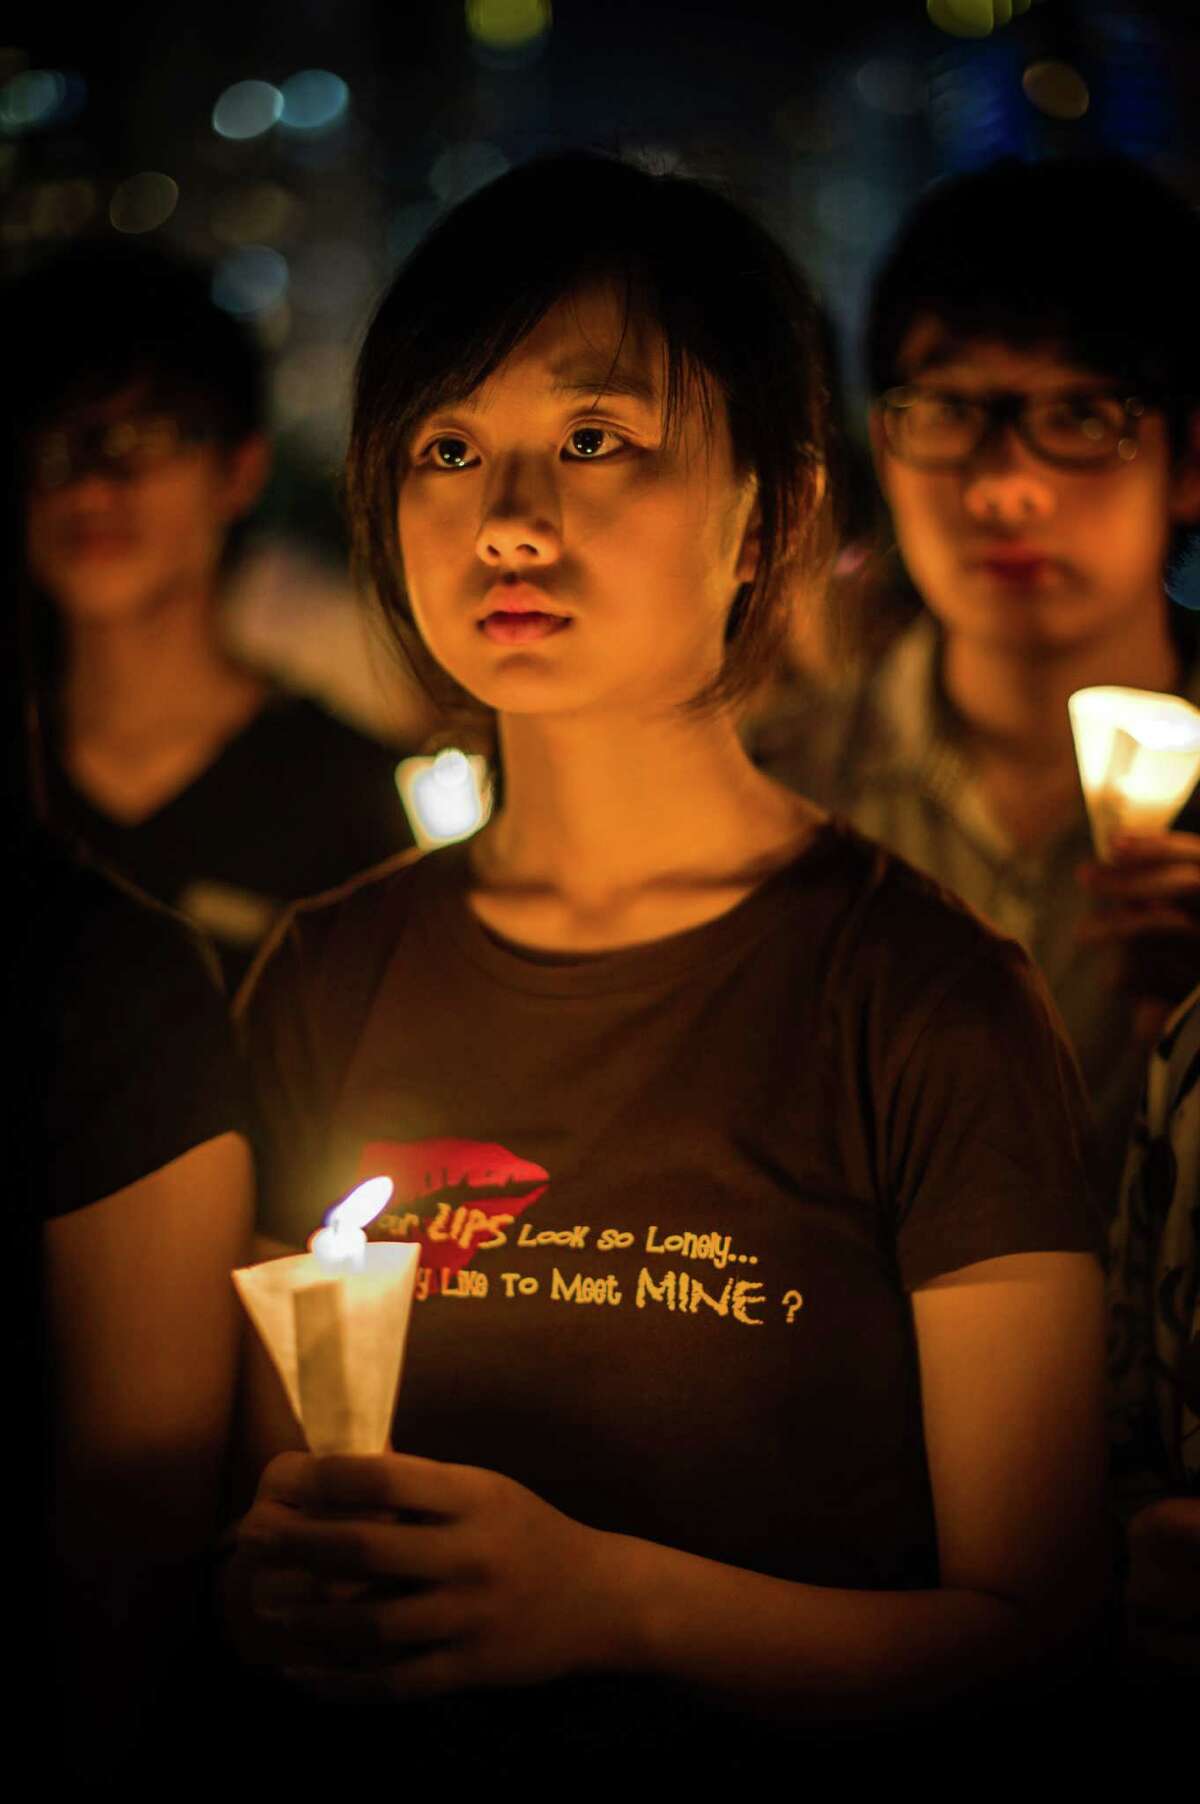 A girl holds a candle during a candlelight vigil in Hong Kong on June 4, 2012 held to mark the crackdown on the pro-democracy movement in Beijing's Tiananmen Square in 1989. Hundreds, perhaps thousands, are believed to have died when the government sent in tanks and soldiers to clear Tiananmen Square, bringing a violent end to six weeks of pro-democracy protests. AFP PHOTO / Philippe LopezPHILIPPE LOPEZ/AFP/GettyImages